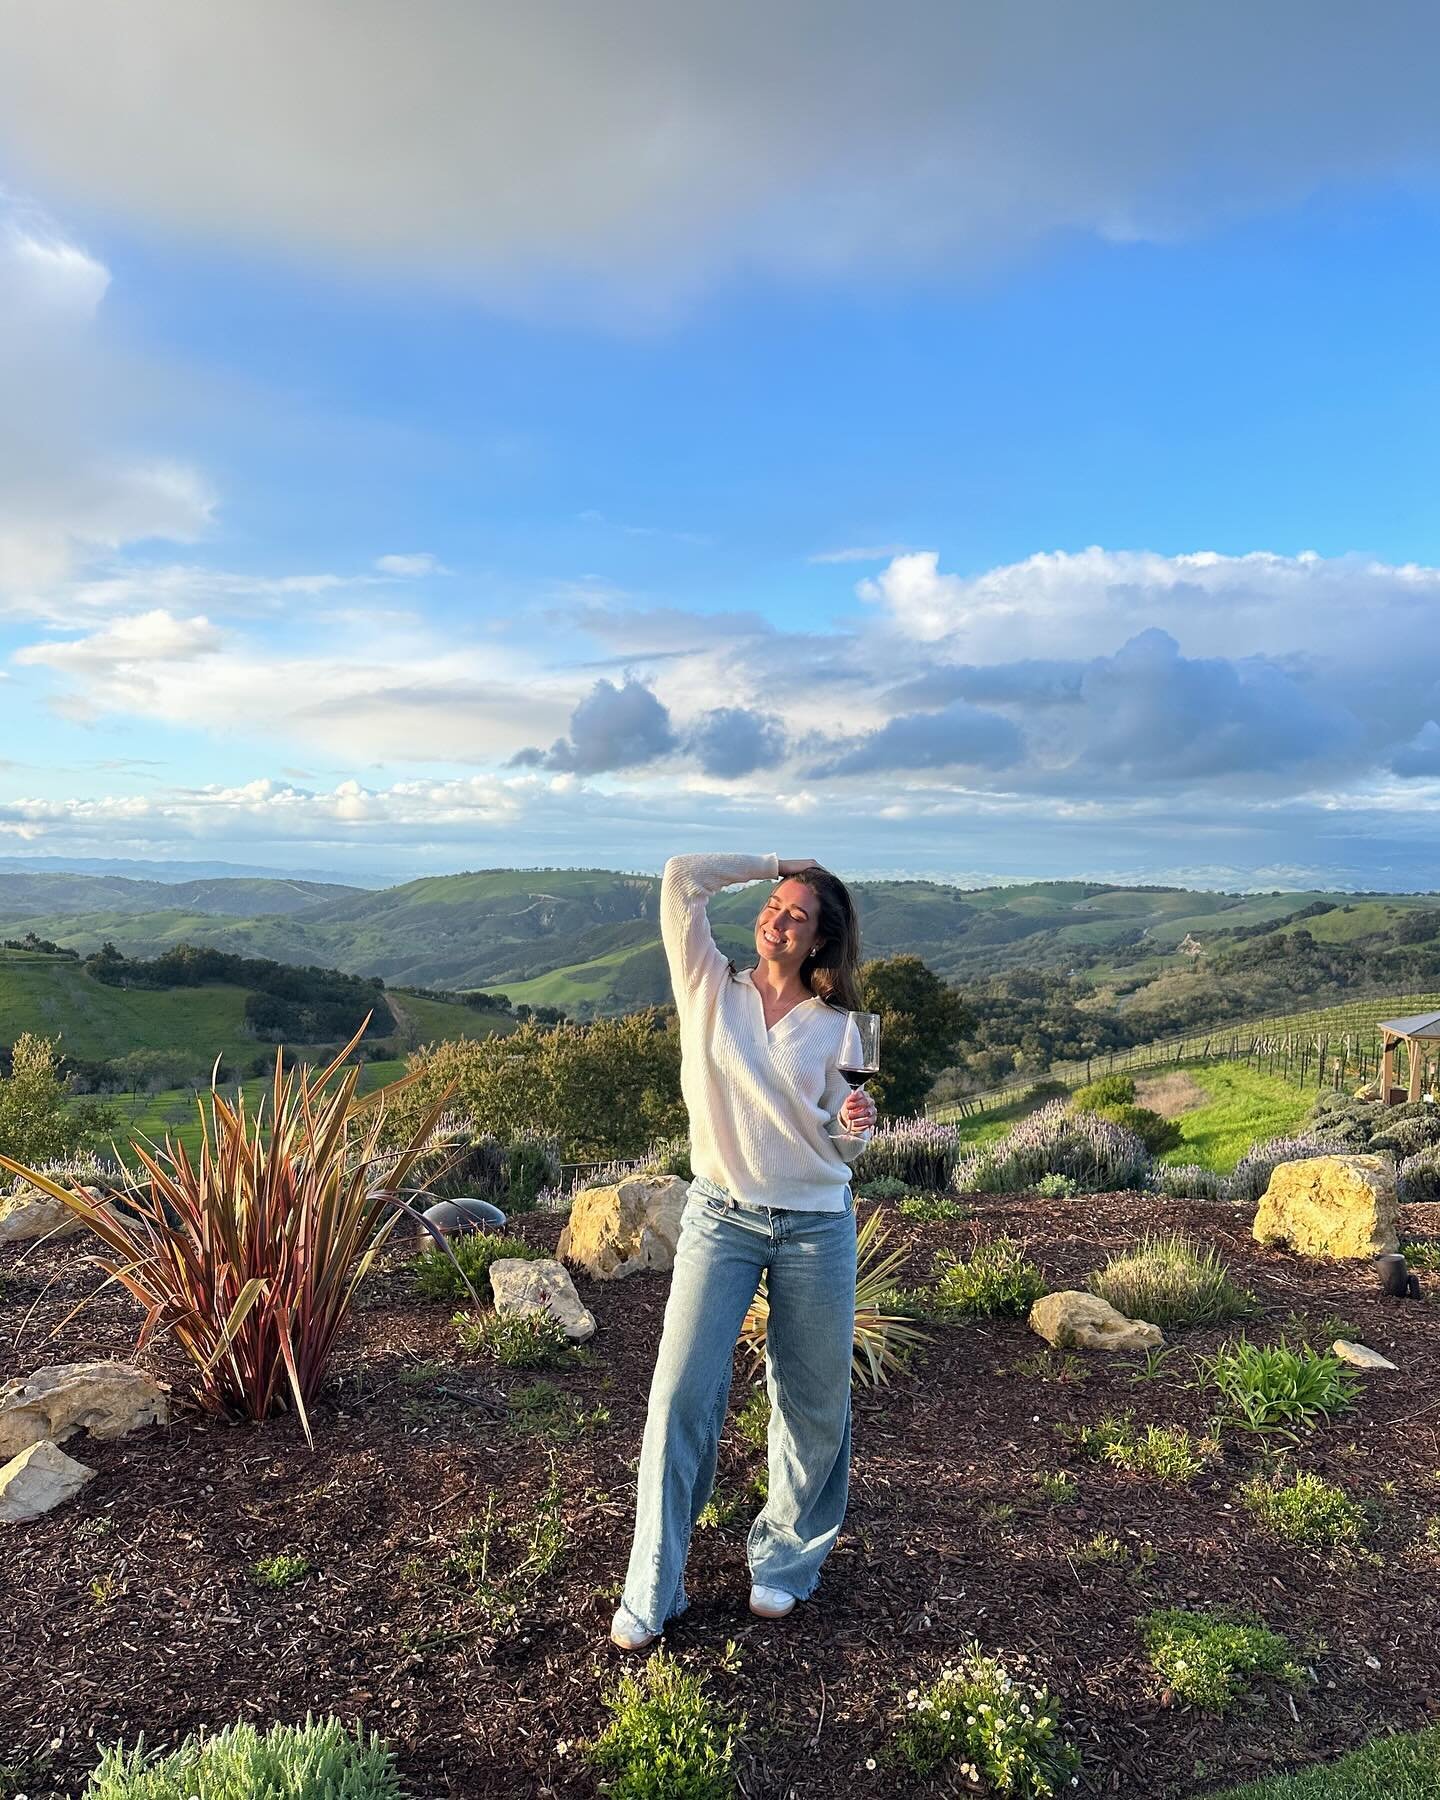 in honor of heading out this weekend on my next Visit California shoot with @beautifuldestinations 📸 a look at our last trip:
1. DAOU Vineyards in Paso Robles, CA
2. ^^ - the views, charcuterie + wine are 100/10 @daouvineyards 
3. renting a vintage 